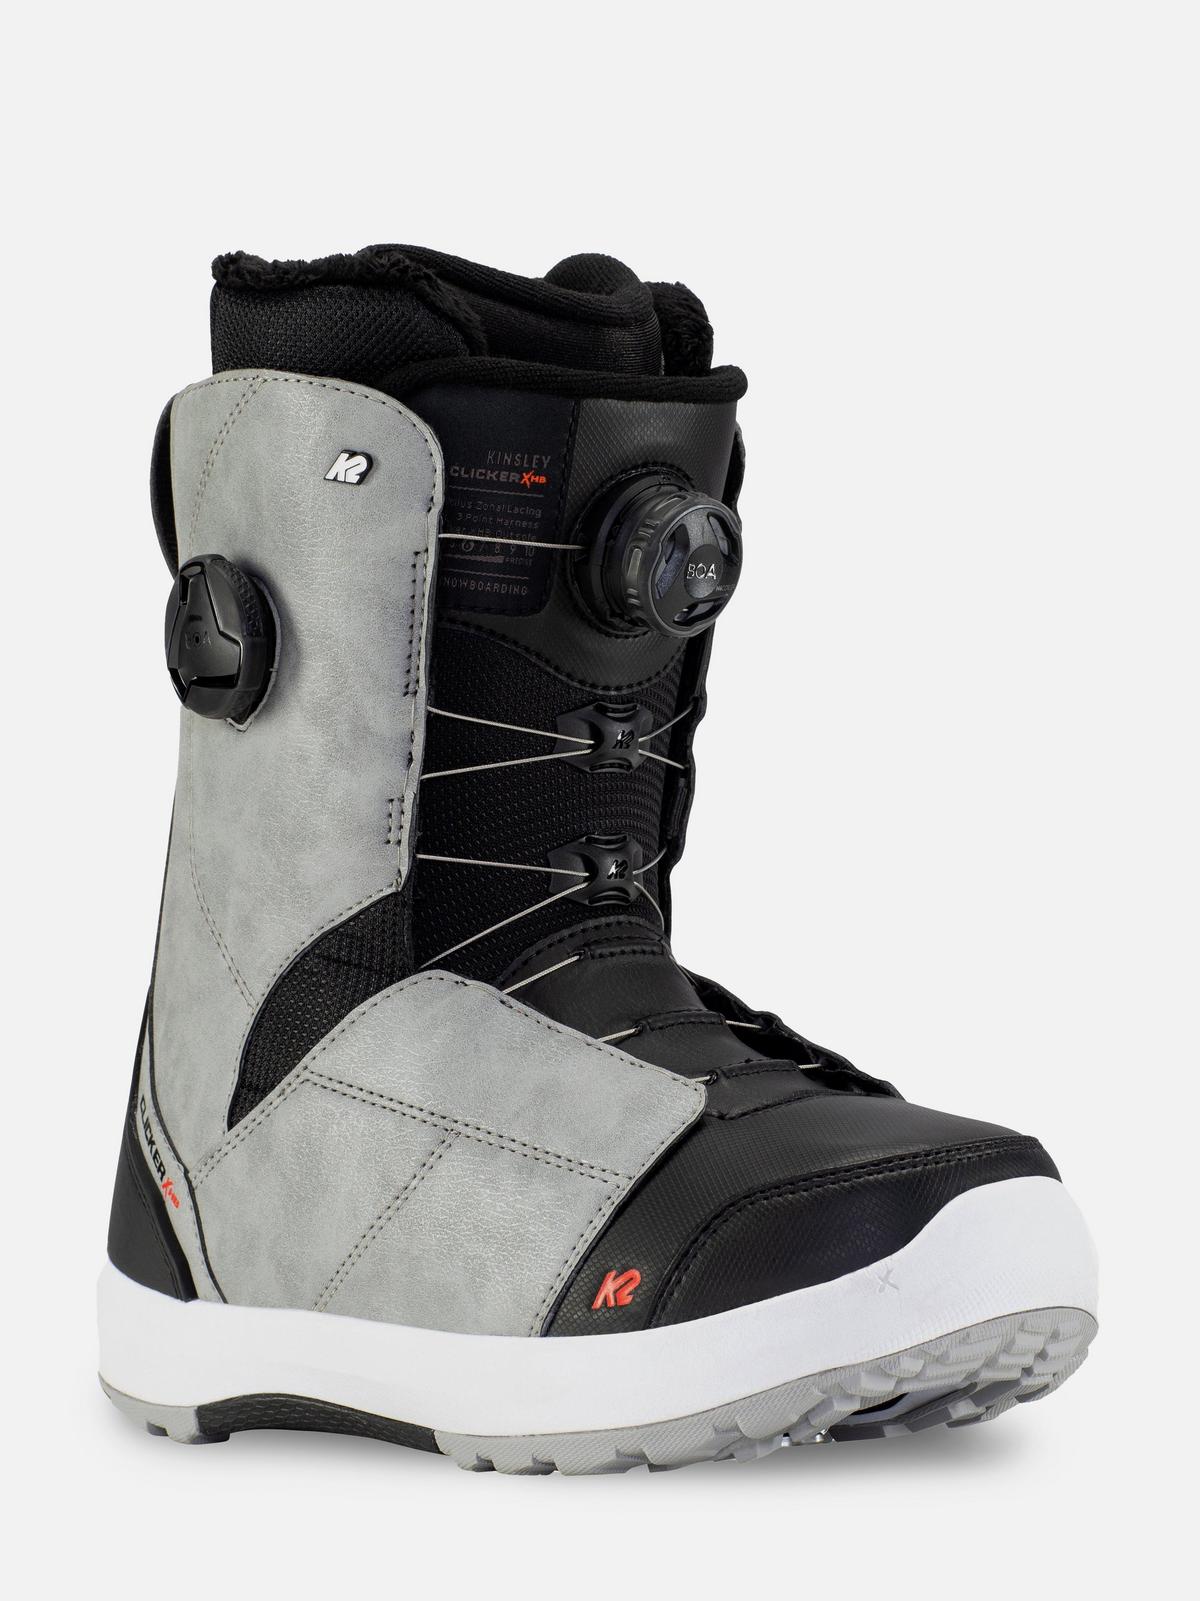 K2 Kinsley Clicker™ X HB Snowboard Boots 2022 | K2 Skis and K2 Snowboarding